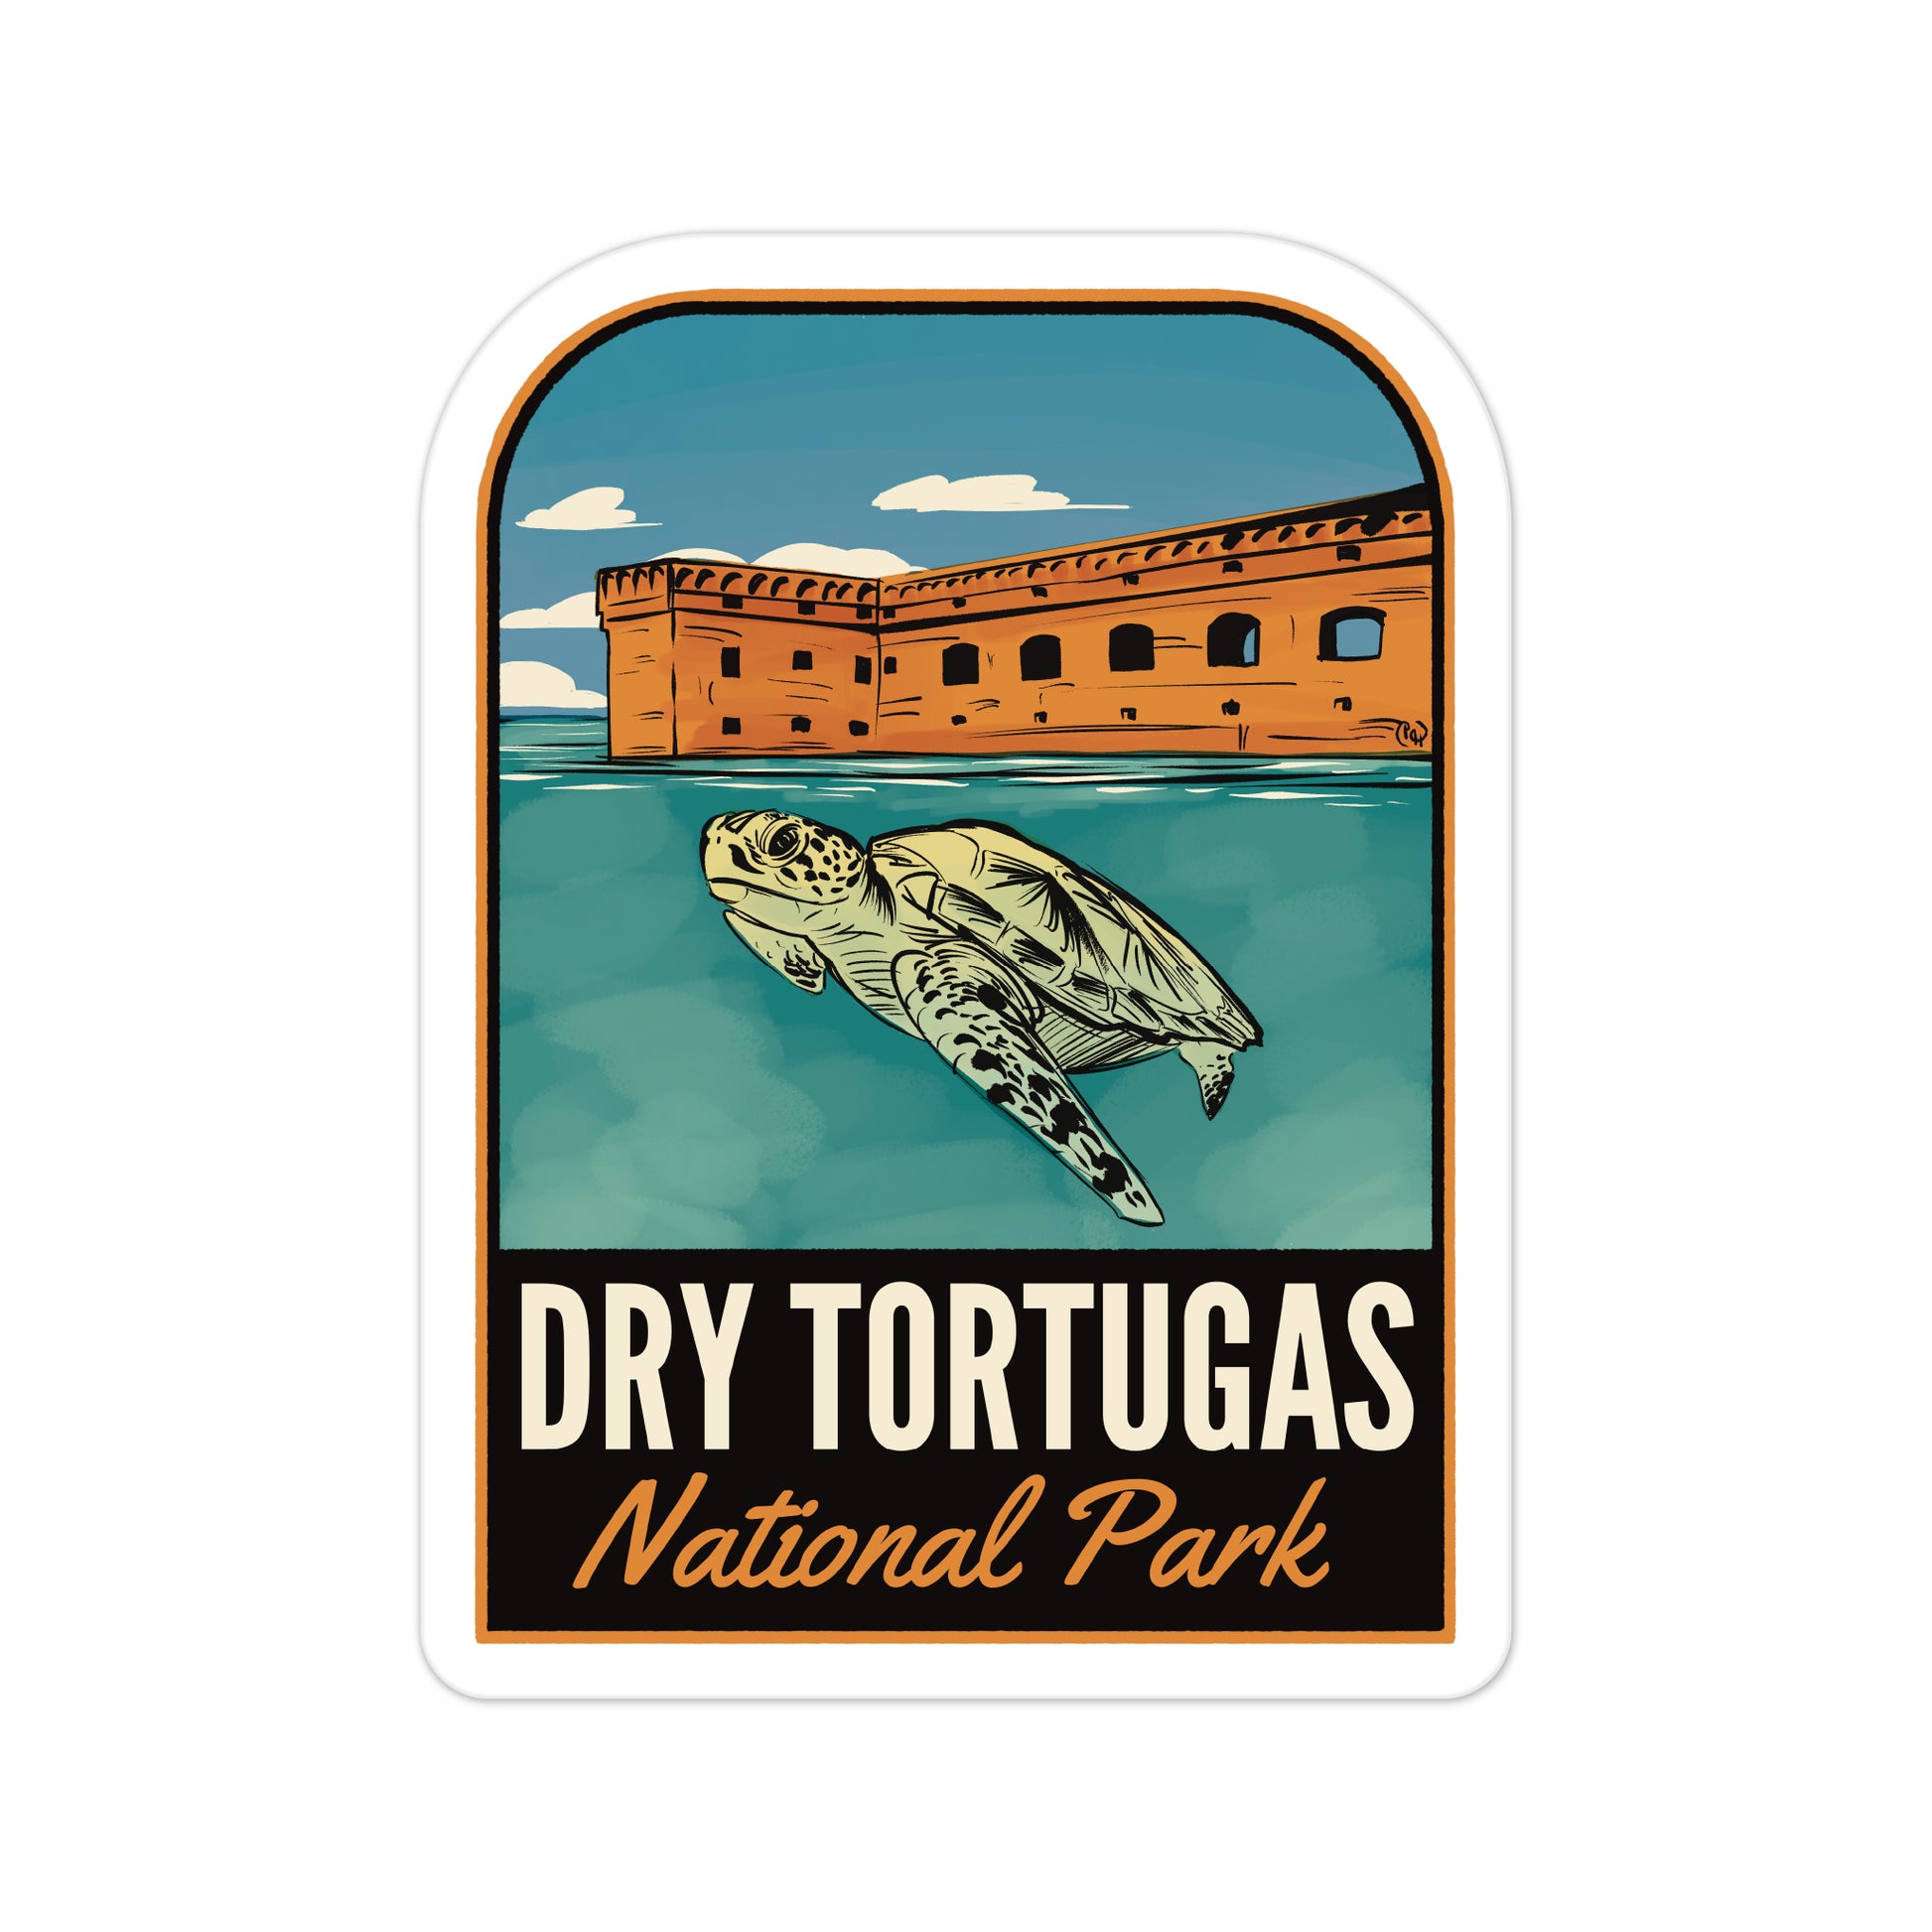 A sticker of Dry Tortugas National Park